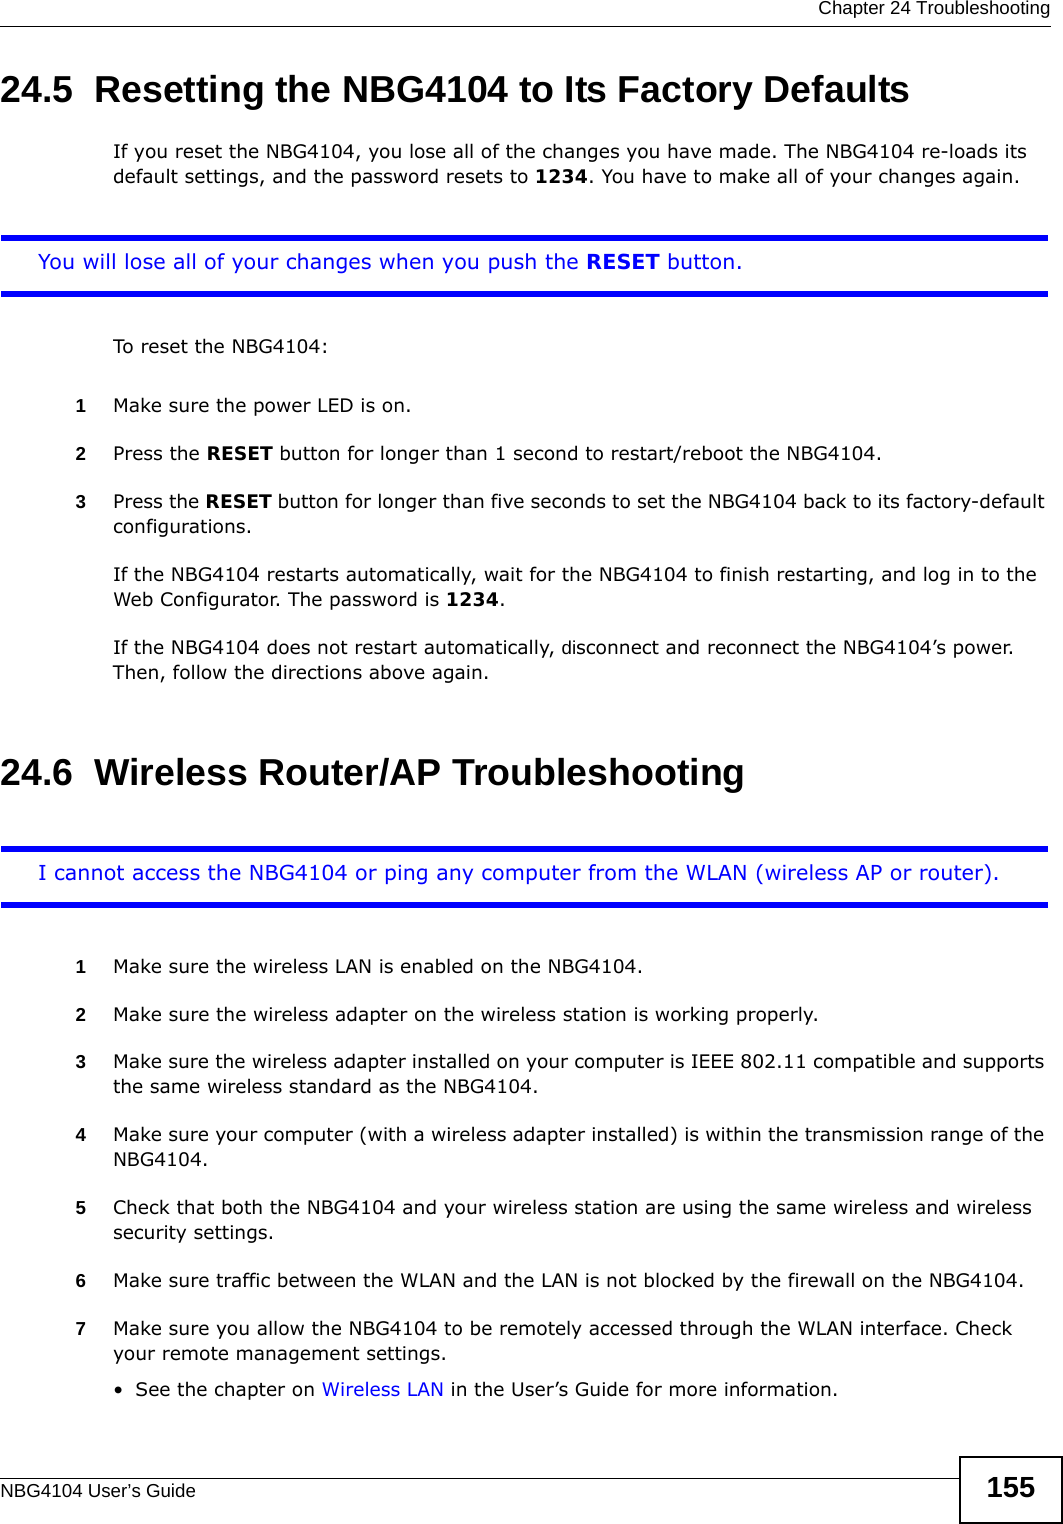  Chapter 24 TroubleshootingNBG4104 User’s Guide 15524.5  Resetting the NBG4104 to Its Factory Defaults If you reset the NBG4104, you lose all of the changes you have made. The NBG4104 re-loads its default settings, and the password resets to 1234. You have to make all of your changes again.You will lose all of your changes when you push the RESET button.To reset the NBG4104:1Make sure the power LED is on.2Press the RESET button for longer than 1 second to restart/reboot the NBG4104.3Press the RESET button for longer than five seconds to set the NBG4104 back to its factory-default configurations.If the NBG4104 restarts automatically, wait for the NBG4104 to finish restarting, and log in to the Web Configurator. The password is 1234.If the NBG4104 does not restart automatically, disconnect and reconnect the NBG4104’s power. Then, follow the directions above again.24.6  Wireless Router/AP TroubleshootingI cannot access the NBG4104 or ping any computer from the WLAN (wireless AP or router).1Make sure the wireless LAN is enabled on the NBG4104.2Make sure the wireless adapter on the wireless station is working properly.3Make sure the wireless adapter installed on your computer is IEEE 802.11 compatible and supports the same wireless standard as the NBG4104.4Make sure your computer (with a wireless adapter installed) is within the transmission range of the NBG4104.5Check that both the NBG4104 and your wireless station are using the same wireless and wireless security settings.6Make sure traffic between the WLAN and the LAN is not blocked by the firewall on the NBG4104. 7Make sure you allow the NBG4104 to be remotely accessed through the WLAN interface. Check your remote management settings.• See the chapter on Wireless LAN in the User’s Guide for more information.